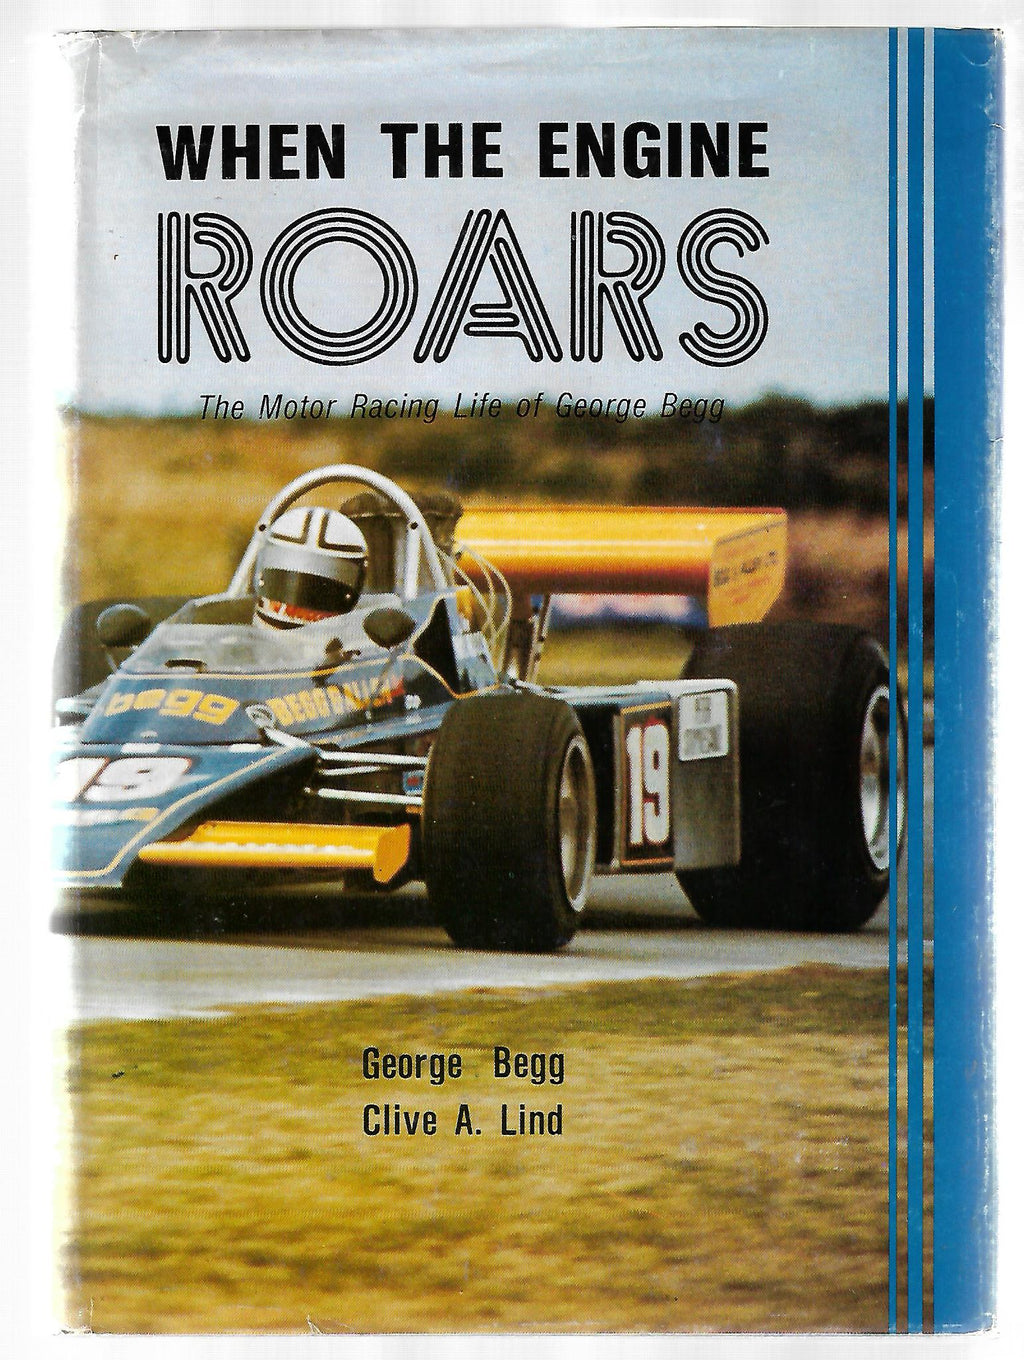 When The Engine Roars The Motor Racing Life of George Begg - by George Begg and Clive A. Lind. [First Edition]